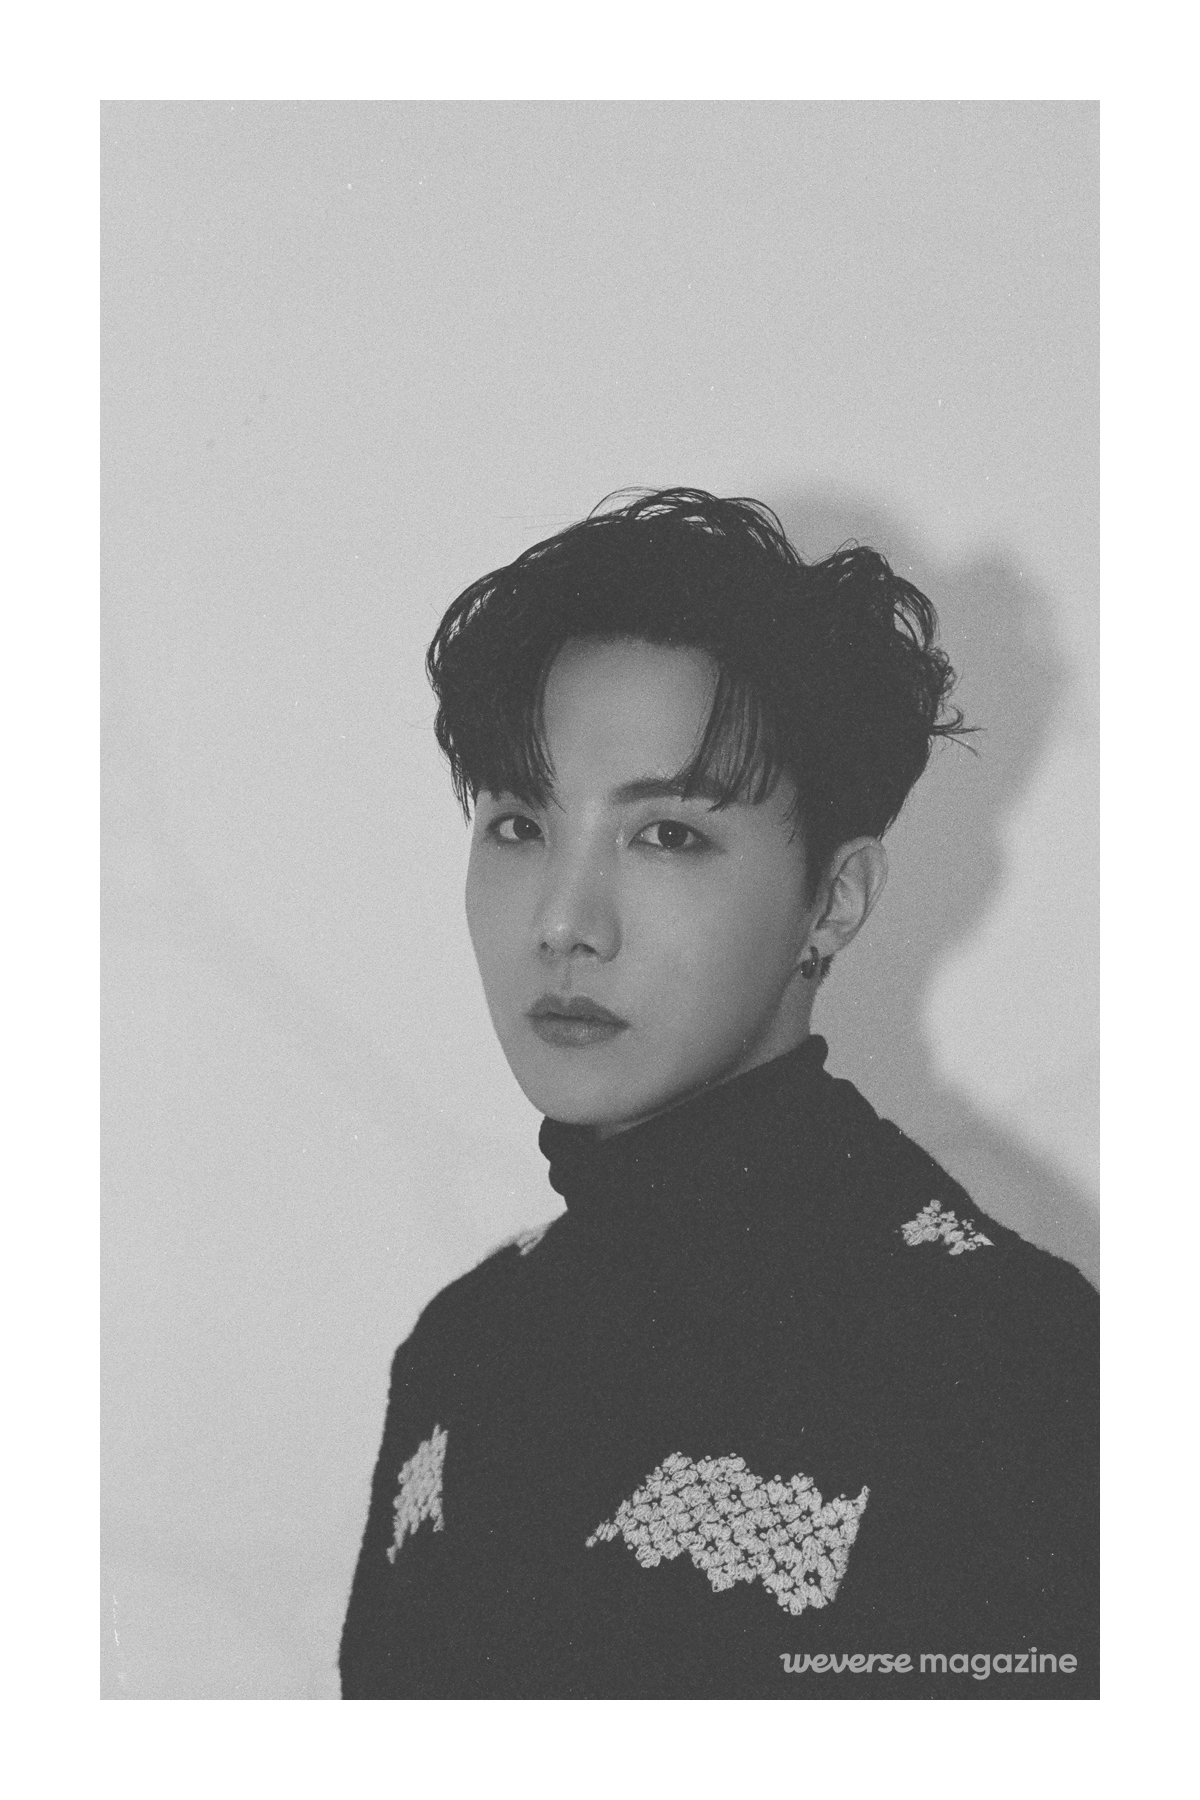 BTS' J-hope approved ways to style black